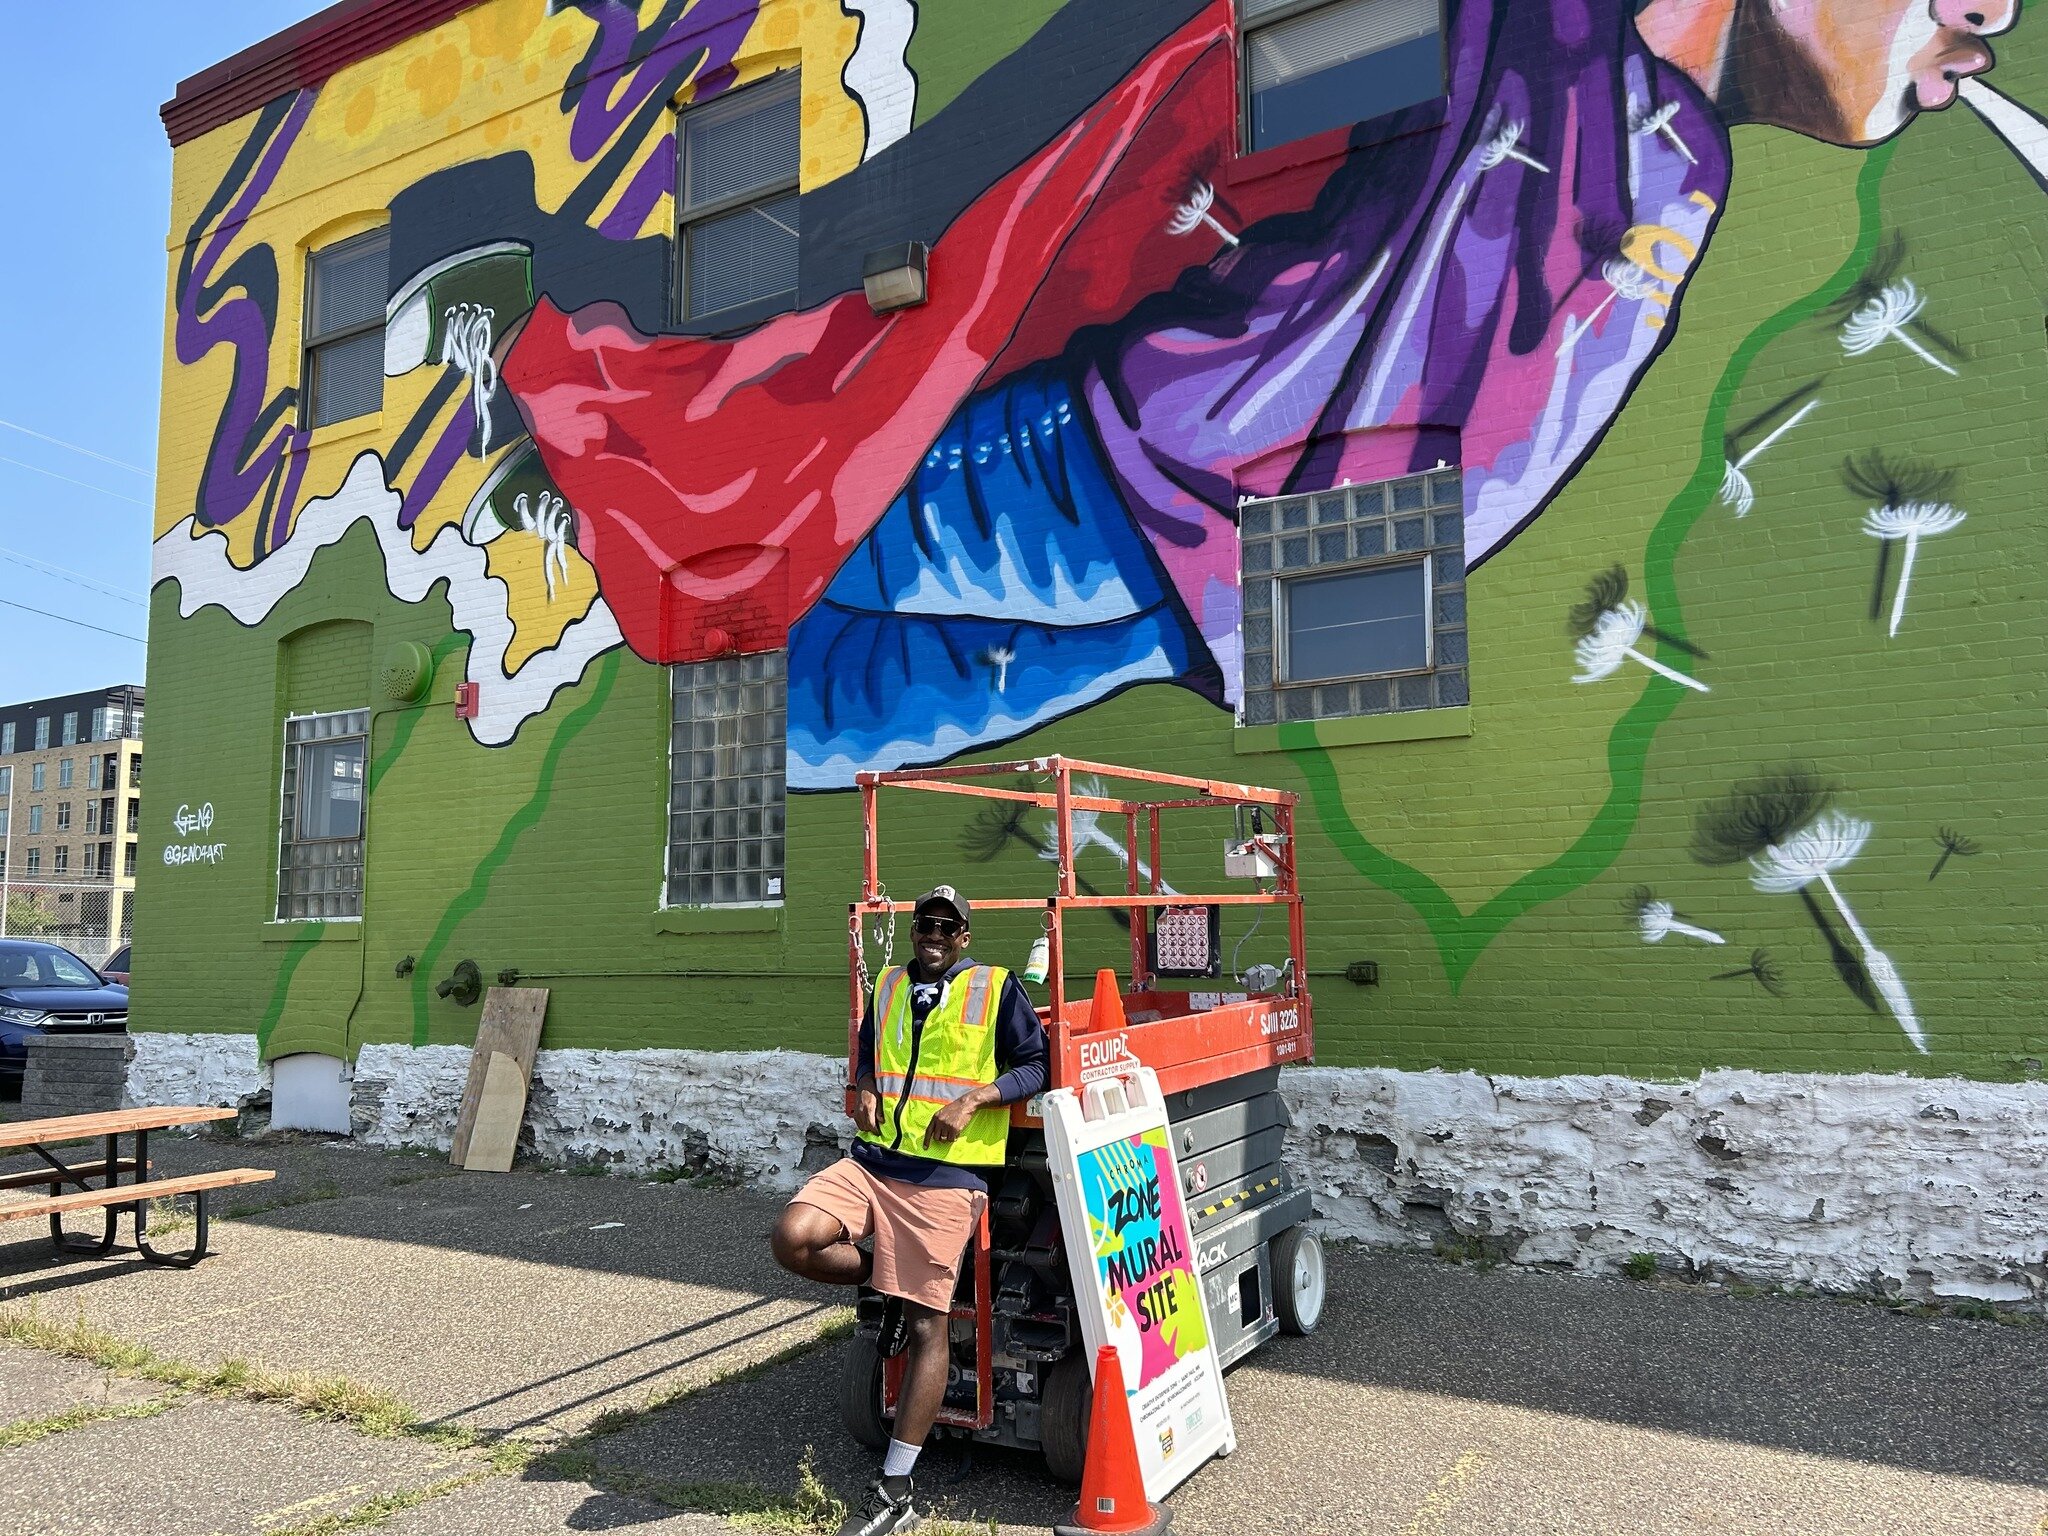 𝙏𝙞𝙢𝙚 𝙁𝙤𝙧 𝙎𝙤𝙢𝙚 𝙐𝙥𝙙𝙖𝙩𝙚𝙨😍

Chroma Zone alum, Geno Okok, recently revisited his mural, ✨Take the Leap of Faith✨ created for last year&rsquo;s Chroma Zone Mural Festival to add some fresh touches🎨🖌️🦸🏾&zwj;♂️

👉🏾You can catch @geno